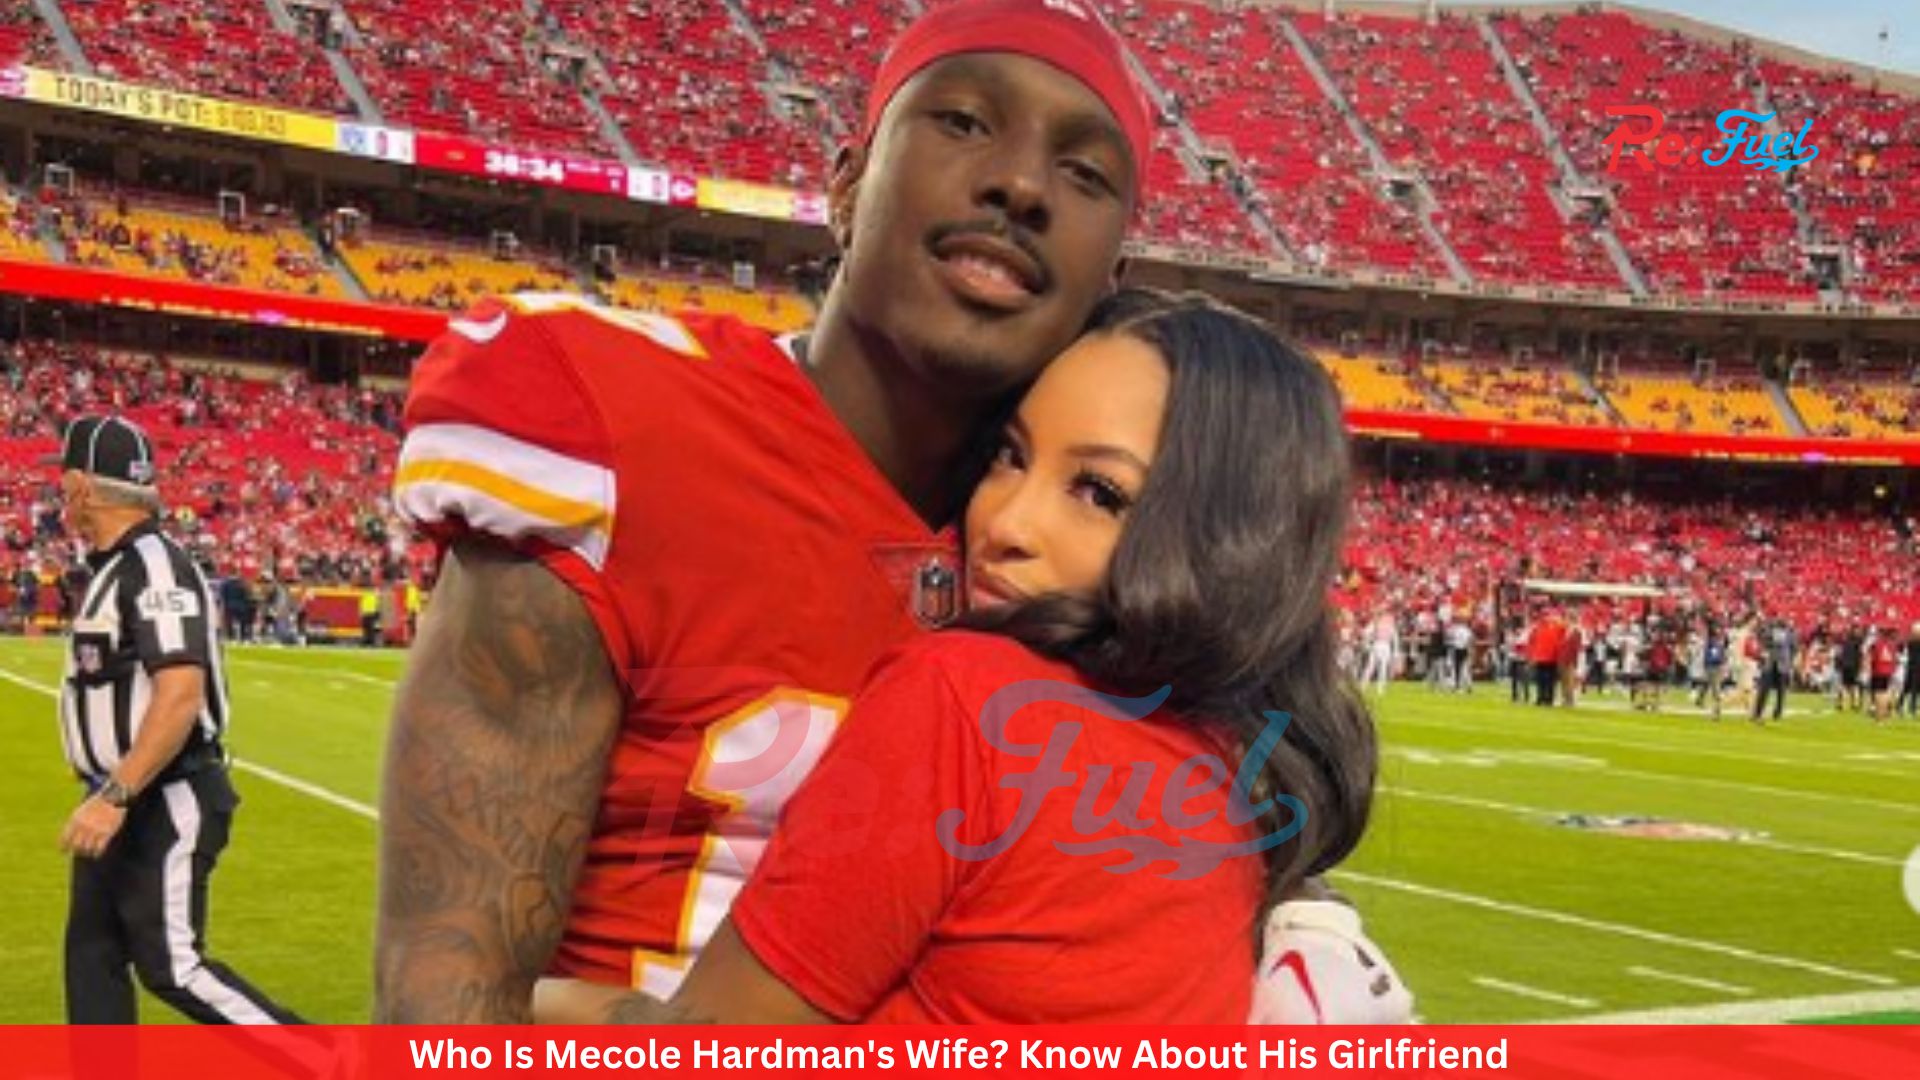 Who Is Mecole Hardman's Wife? Know About His Girlfriend